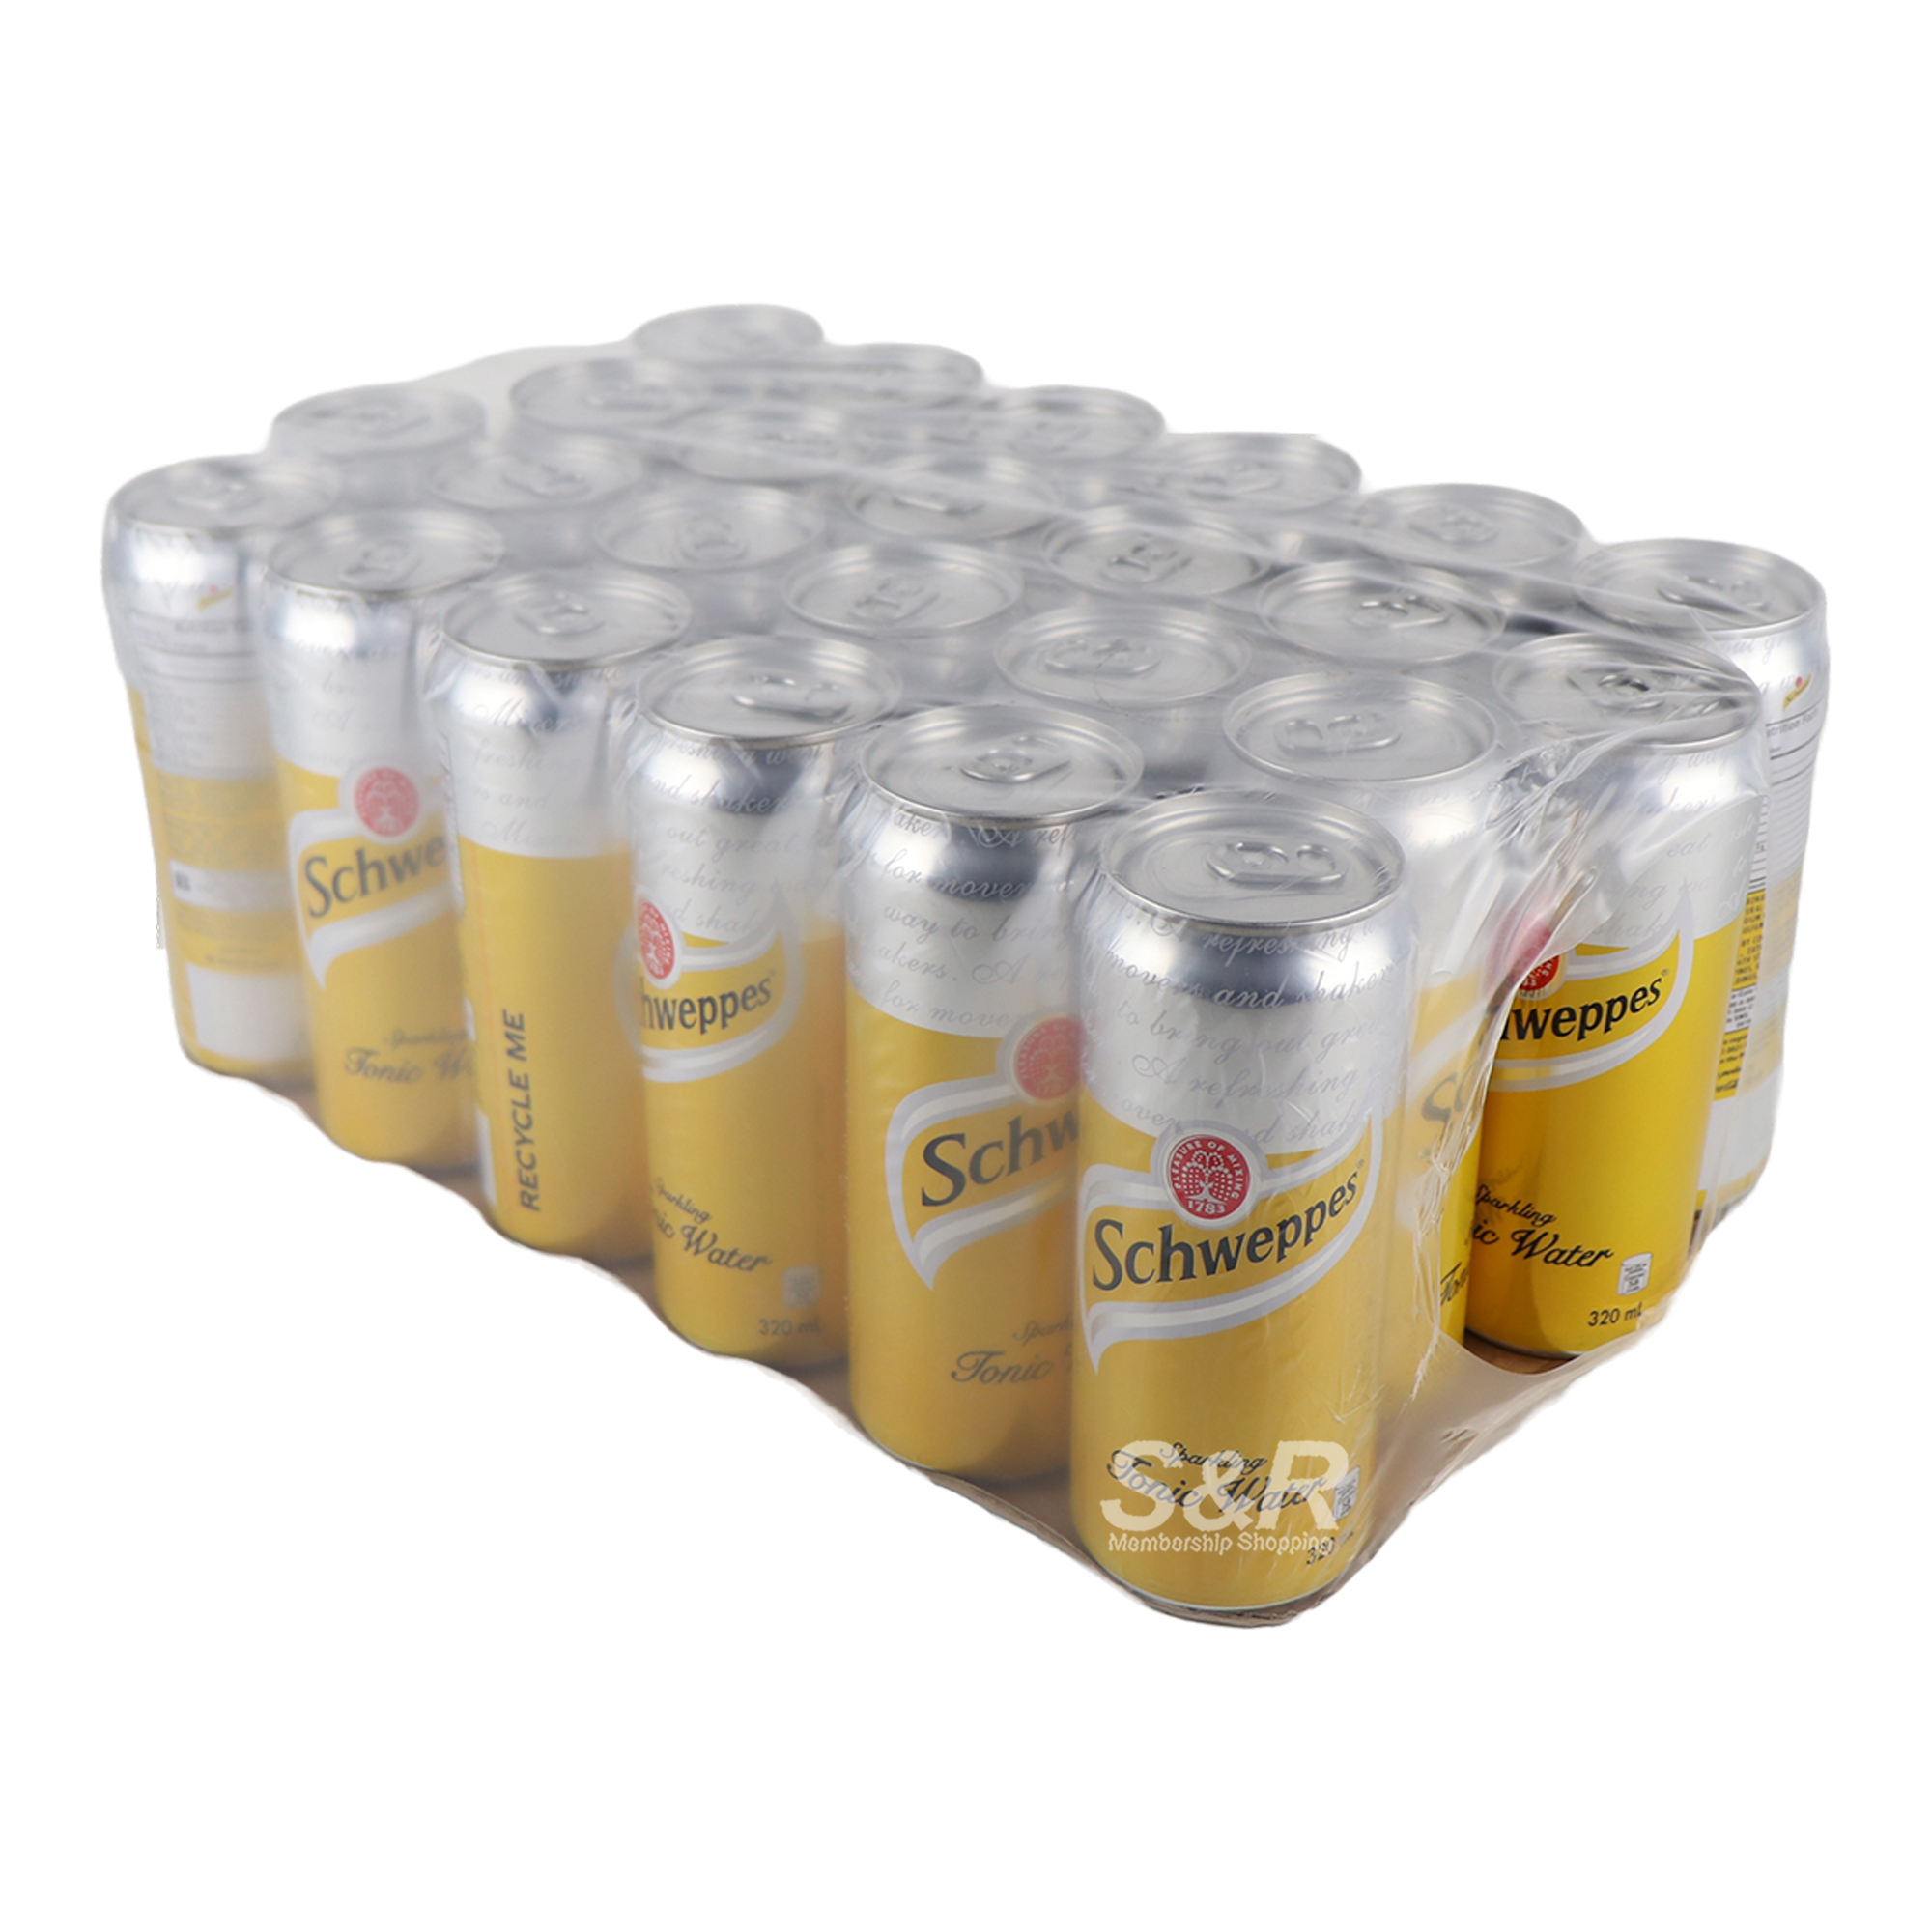 Schweppes Sparkling Tonic Water 24 cans x 330 mL